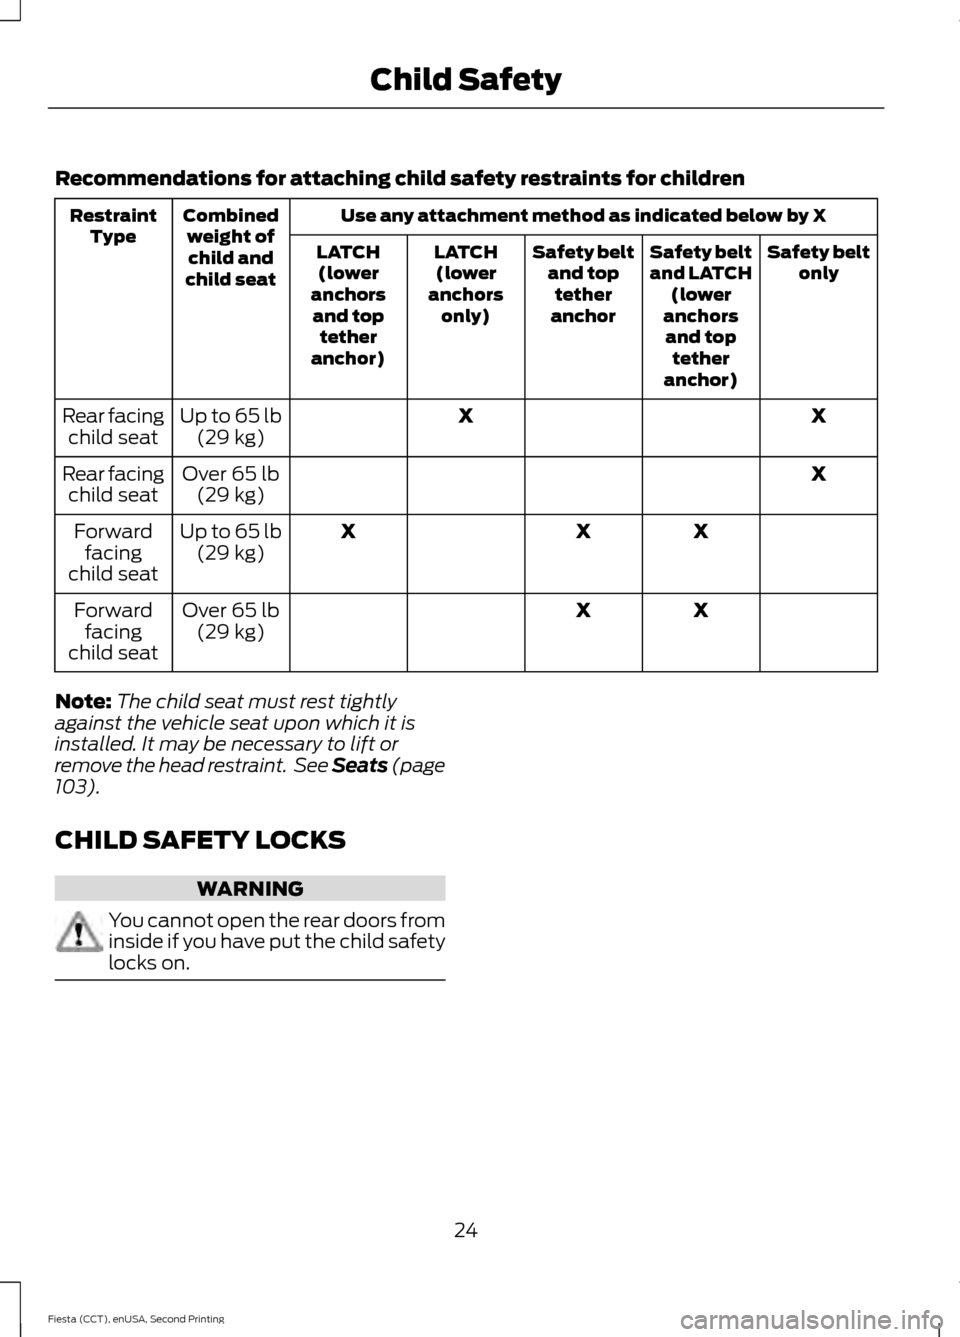 FORD FIESTA 2015 6.G Owners Manual Recommendations for attaching child safety restraints for children
Use any attachment method as indicated below by X
Combined
weight ofchild and
child seat
Restraint
Type Safety belt
only
Safety belt
